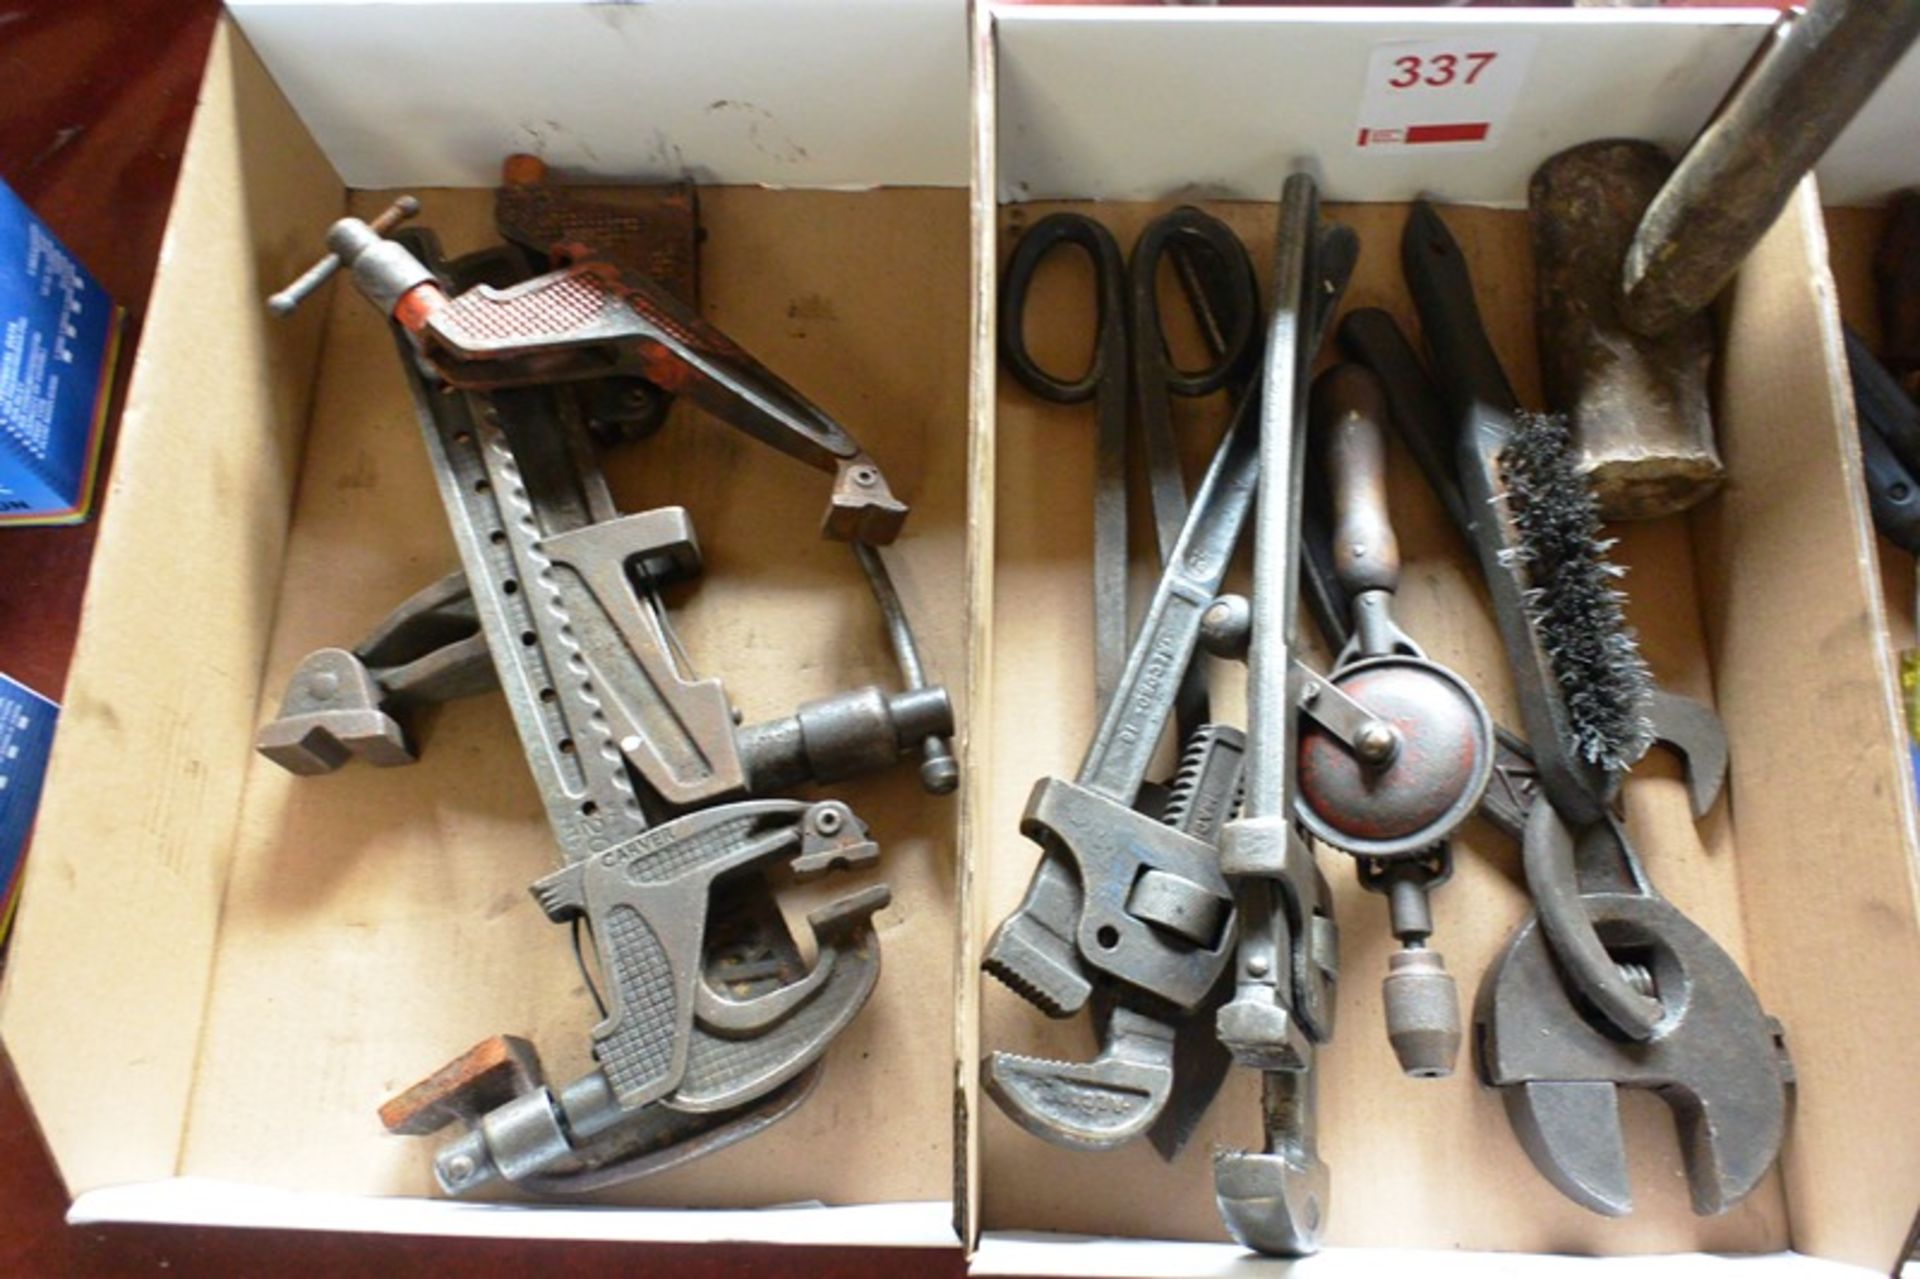 Assorted adjustable spanners, clamps, etc. (Recommended collection period for this lot Wednesday